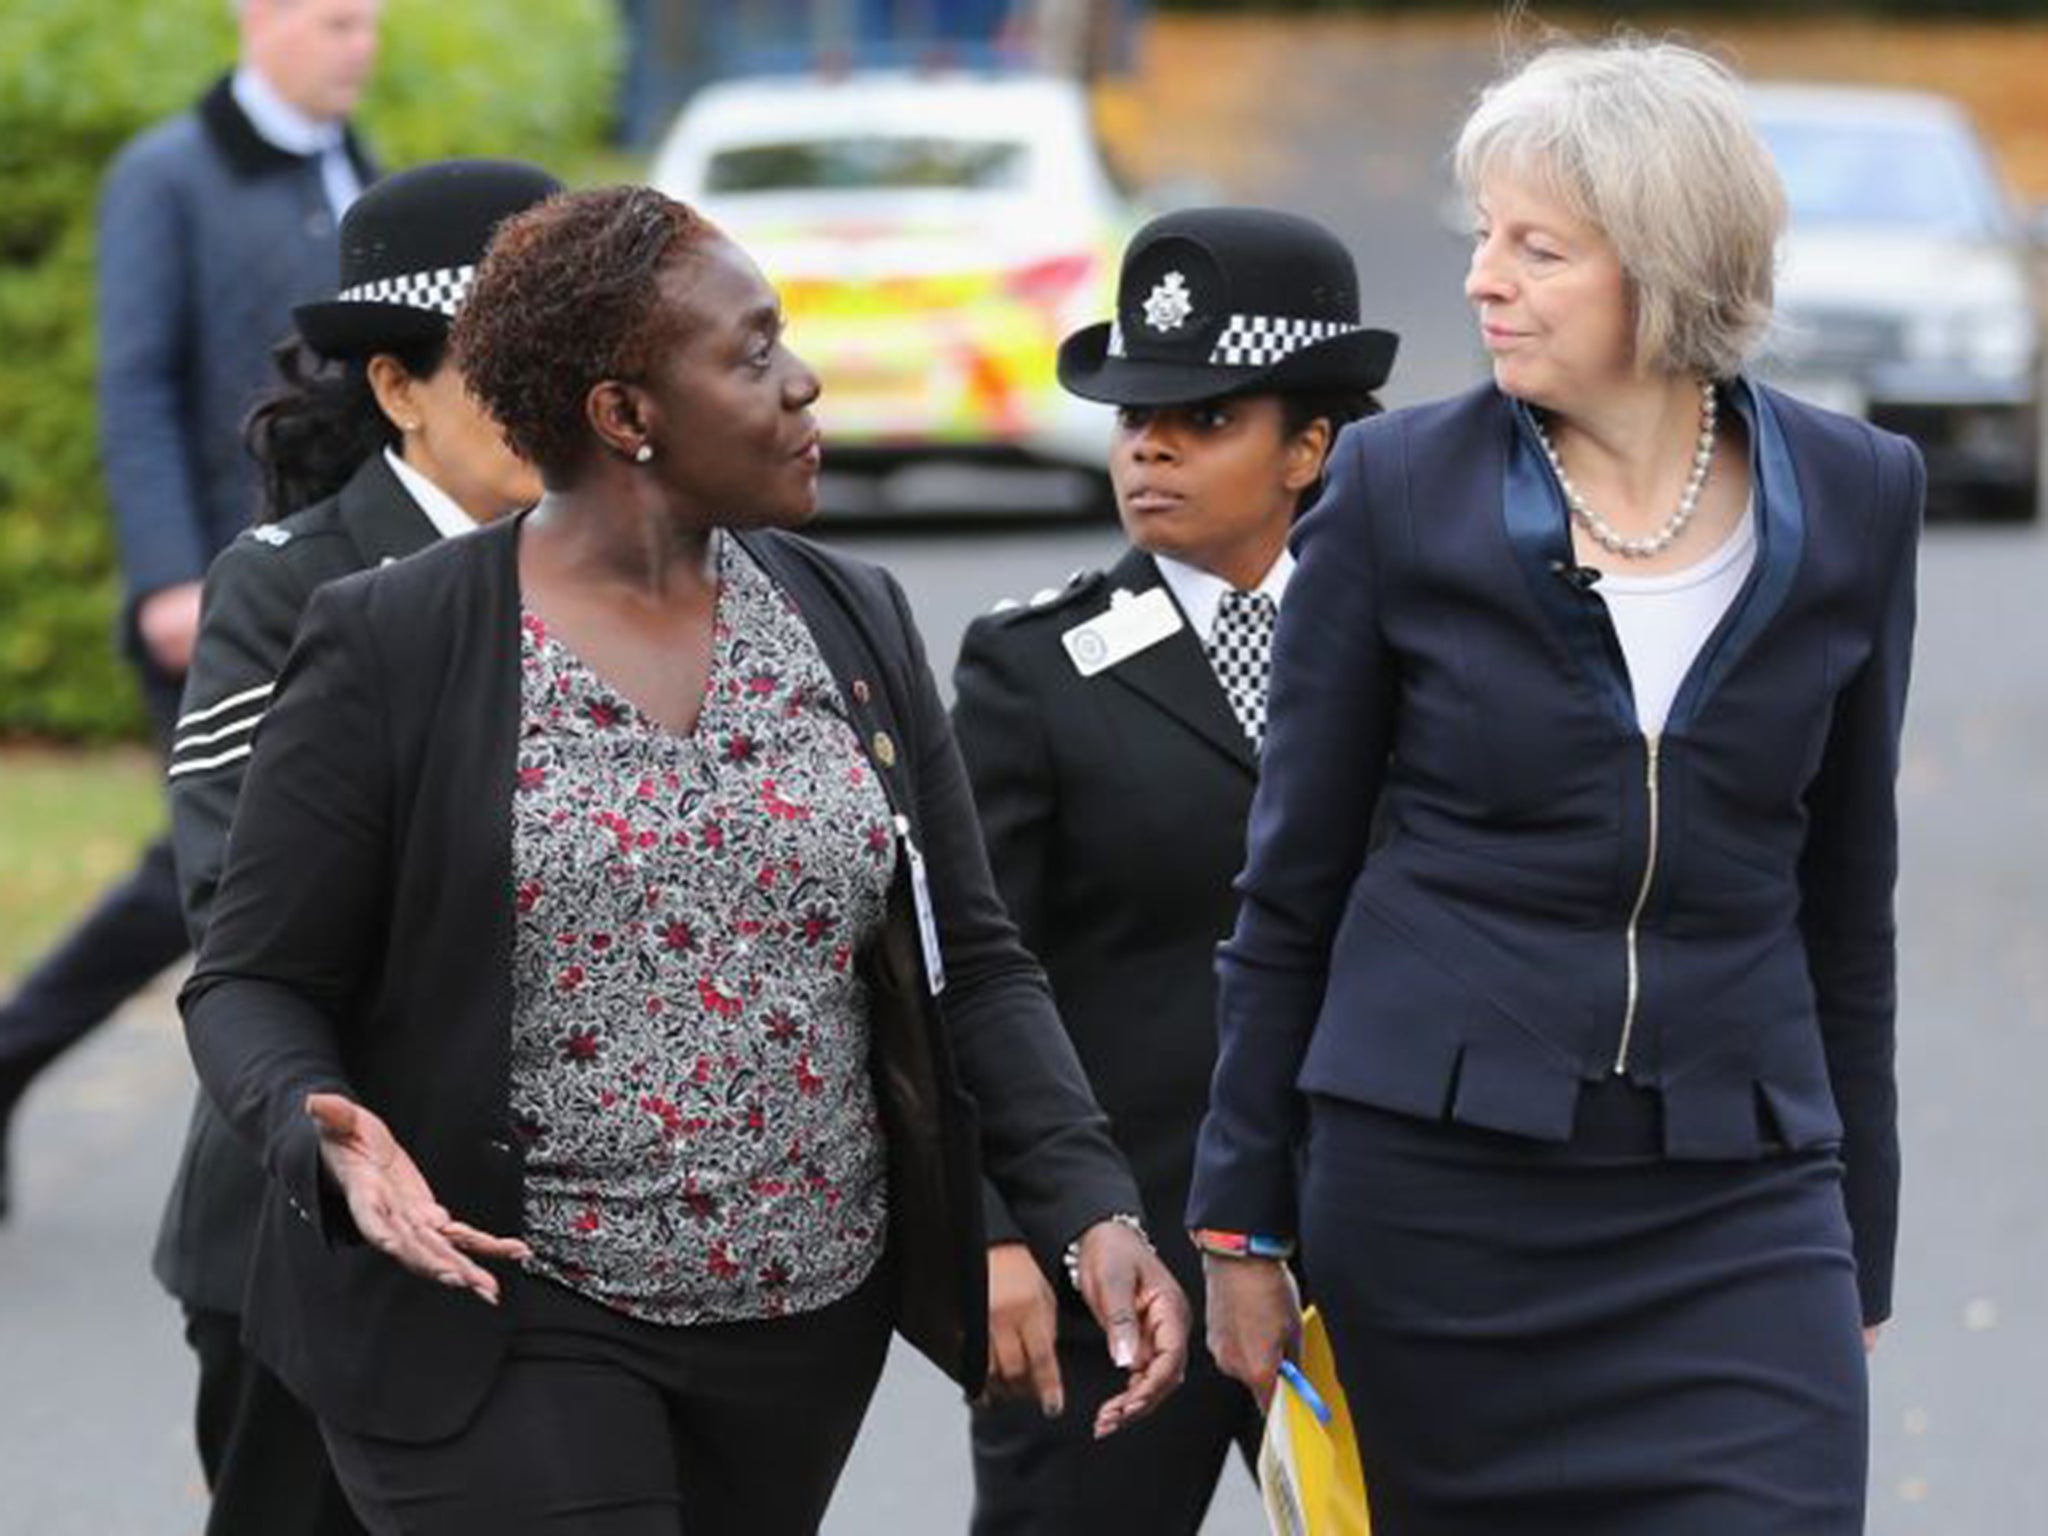 Home Secretary Theresa May, not always on the best of terms with the police, arrives at the National Black Police Association conference in Birmingham, escorted by NBPA chair Franstine Jones